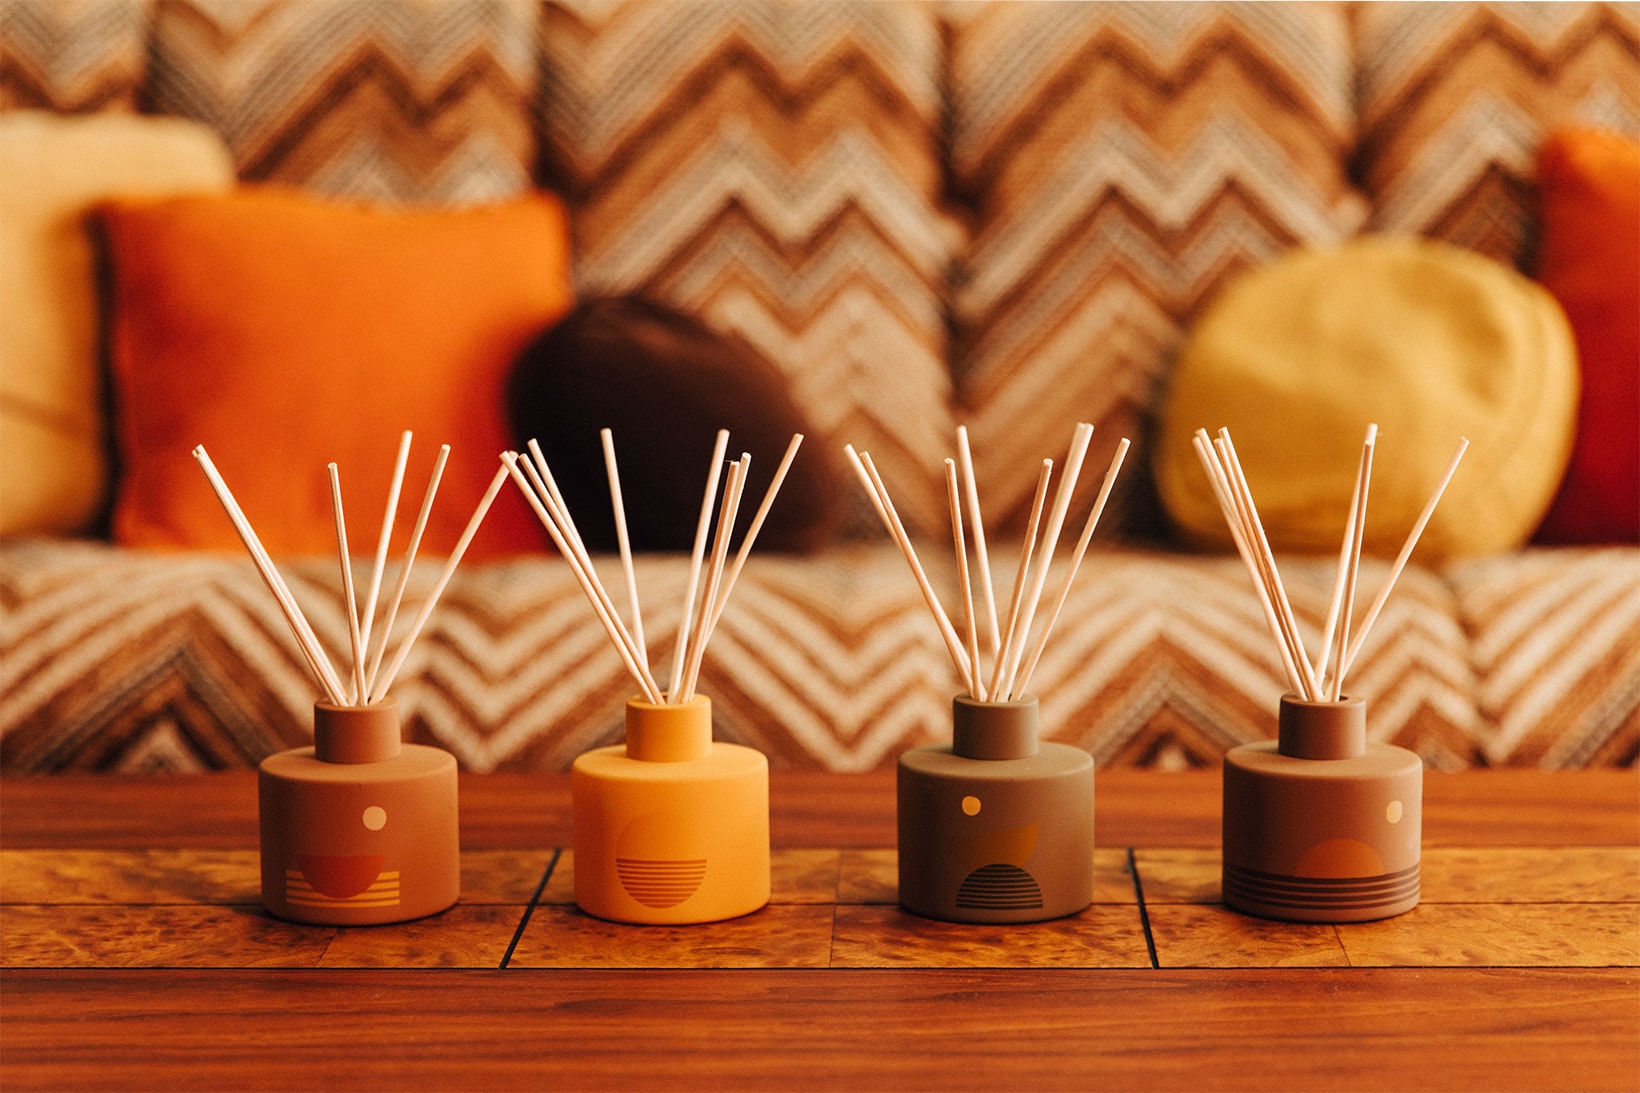 pf candle co candles incense diffusers fragrance home aroma sunset california swell golden hour dusk moonrise